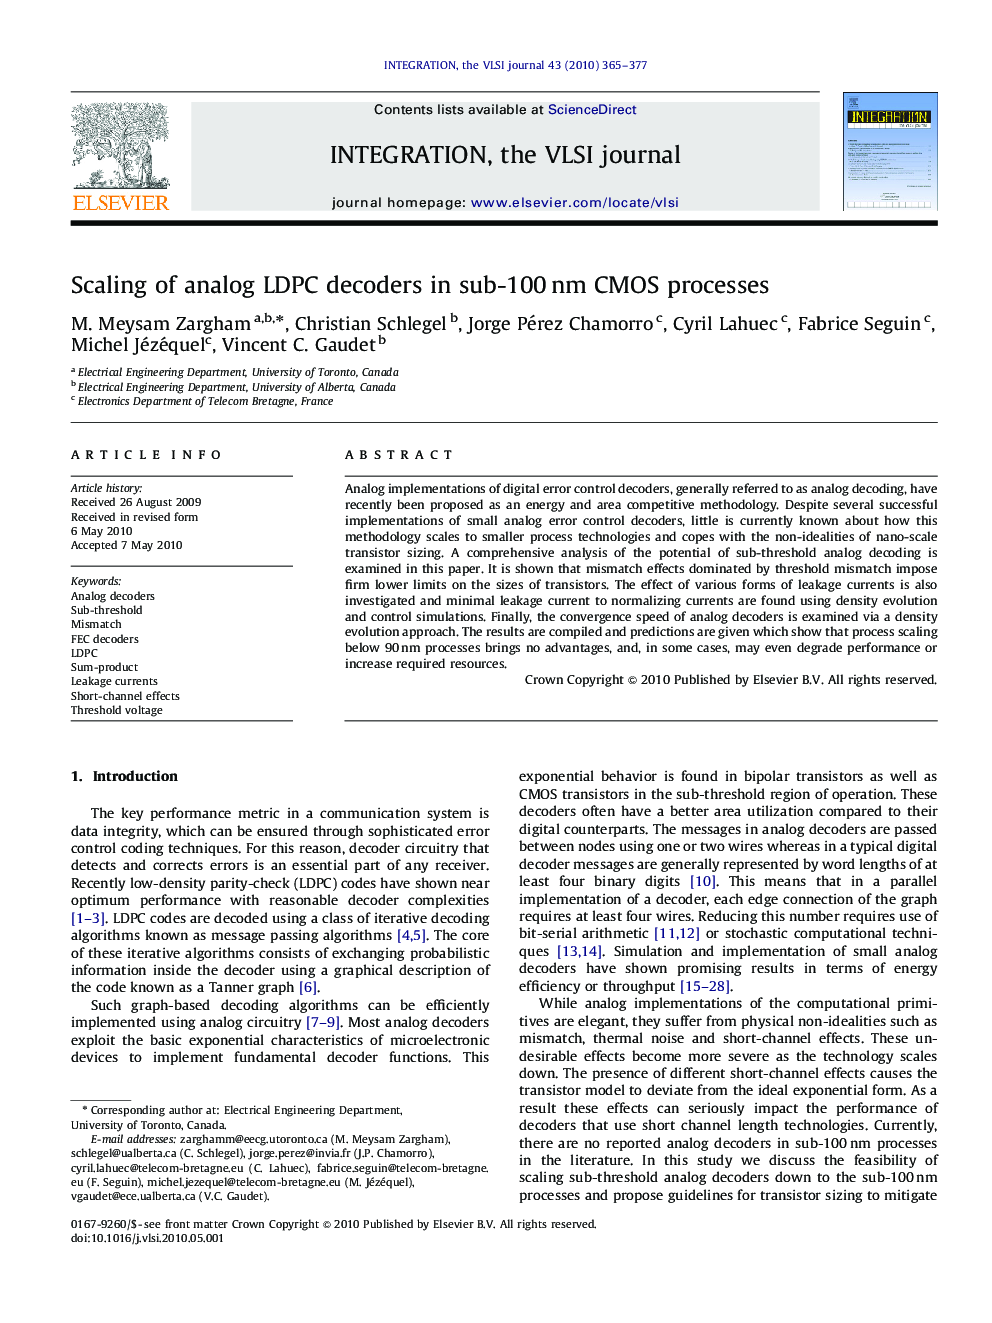 Scaling of analog LDPC decoders in sub-100 nm CMOS processes